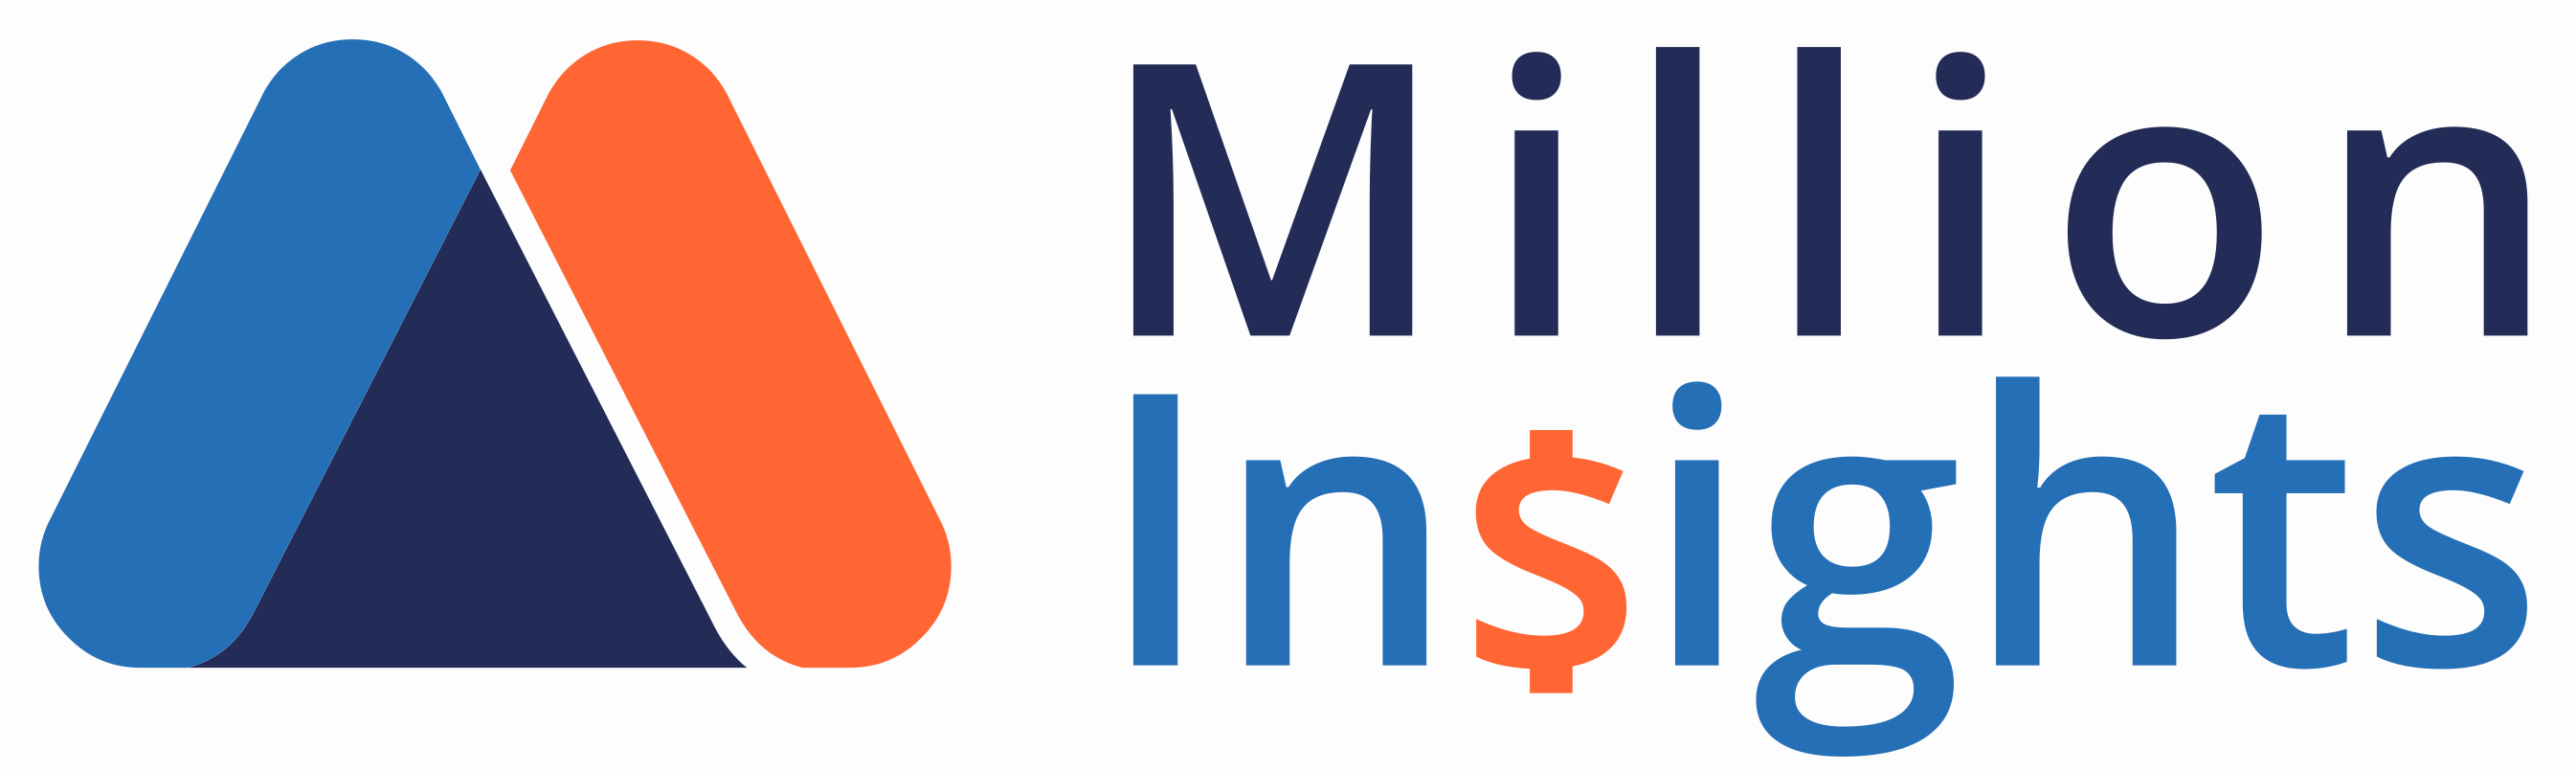 MiRNA Sequencing And Assay Market Will Approach A Healthy CAGR of 13.0% By 2028, Boosted By Rising Usage in Healthcare Business | Million Insights